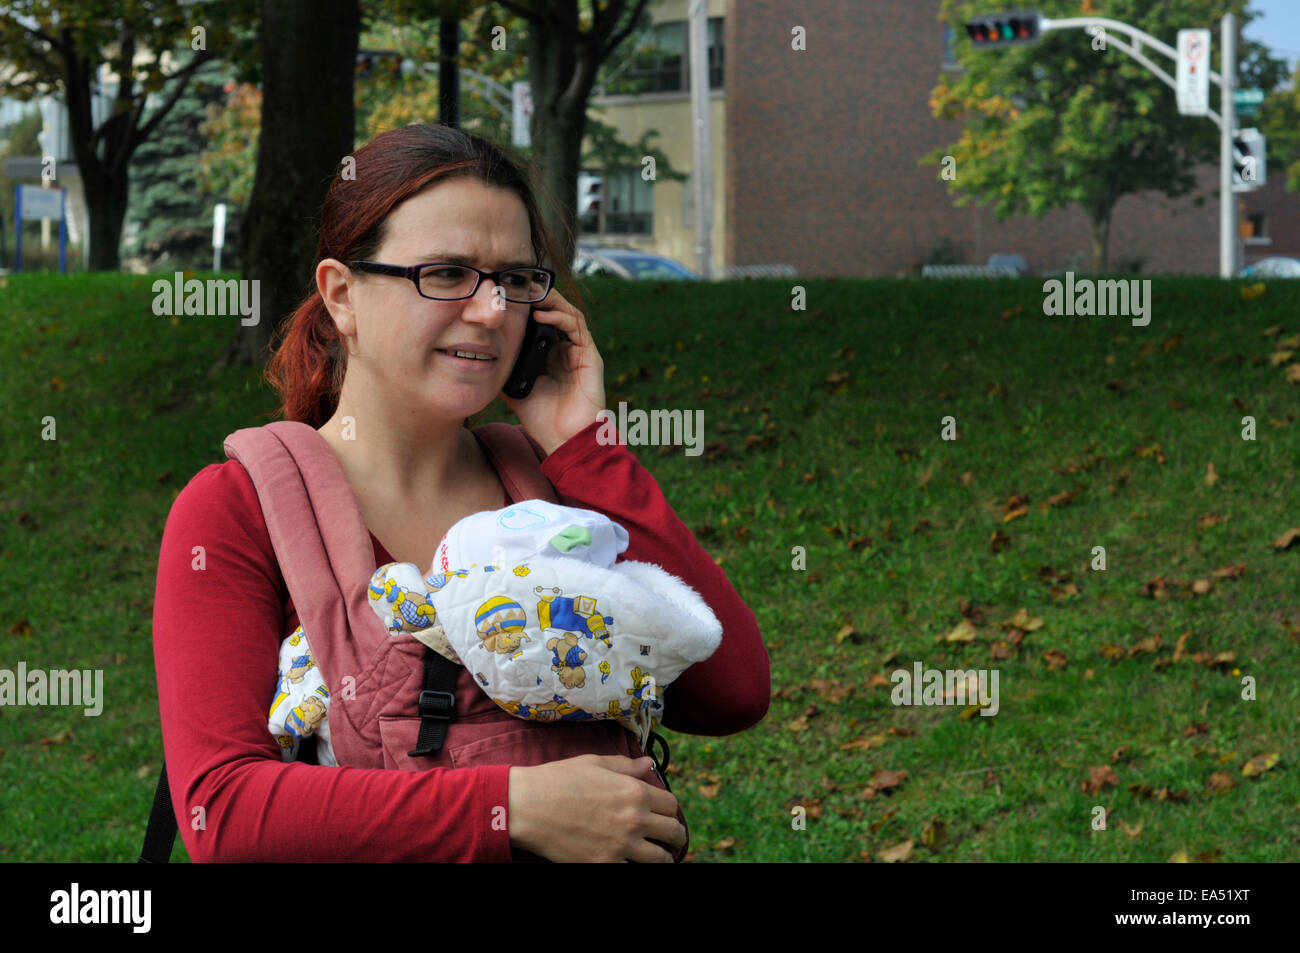 A mother carrying a baby and using a mobile phone Stock Photo